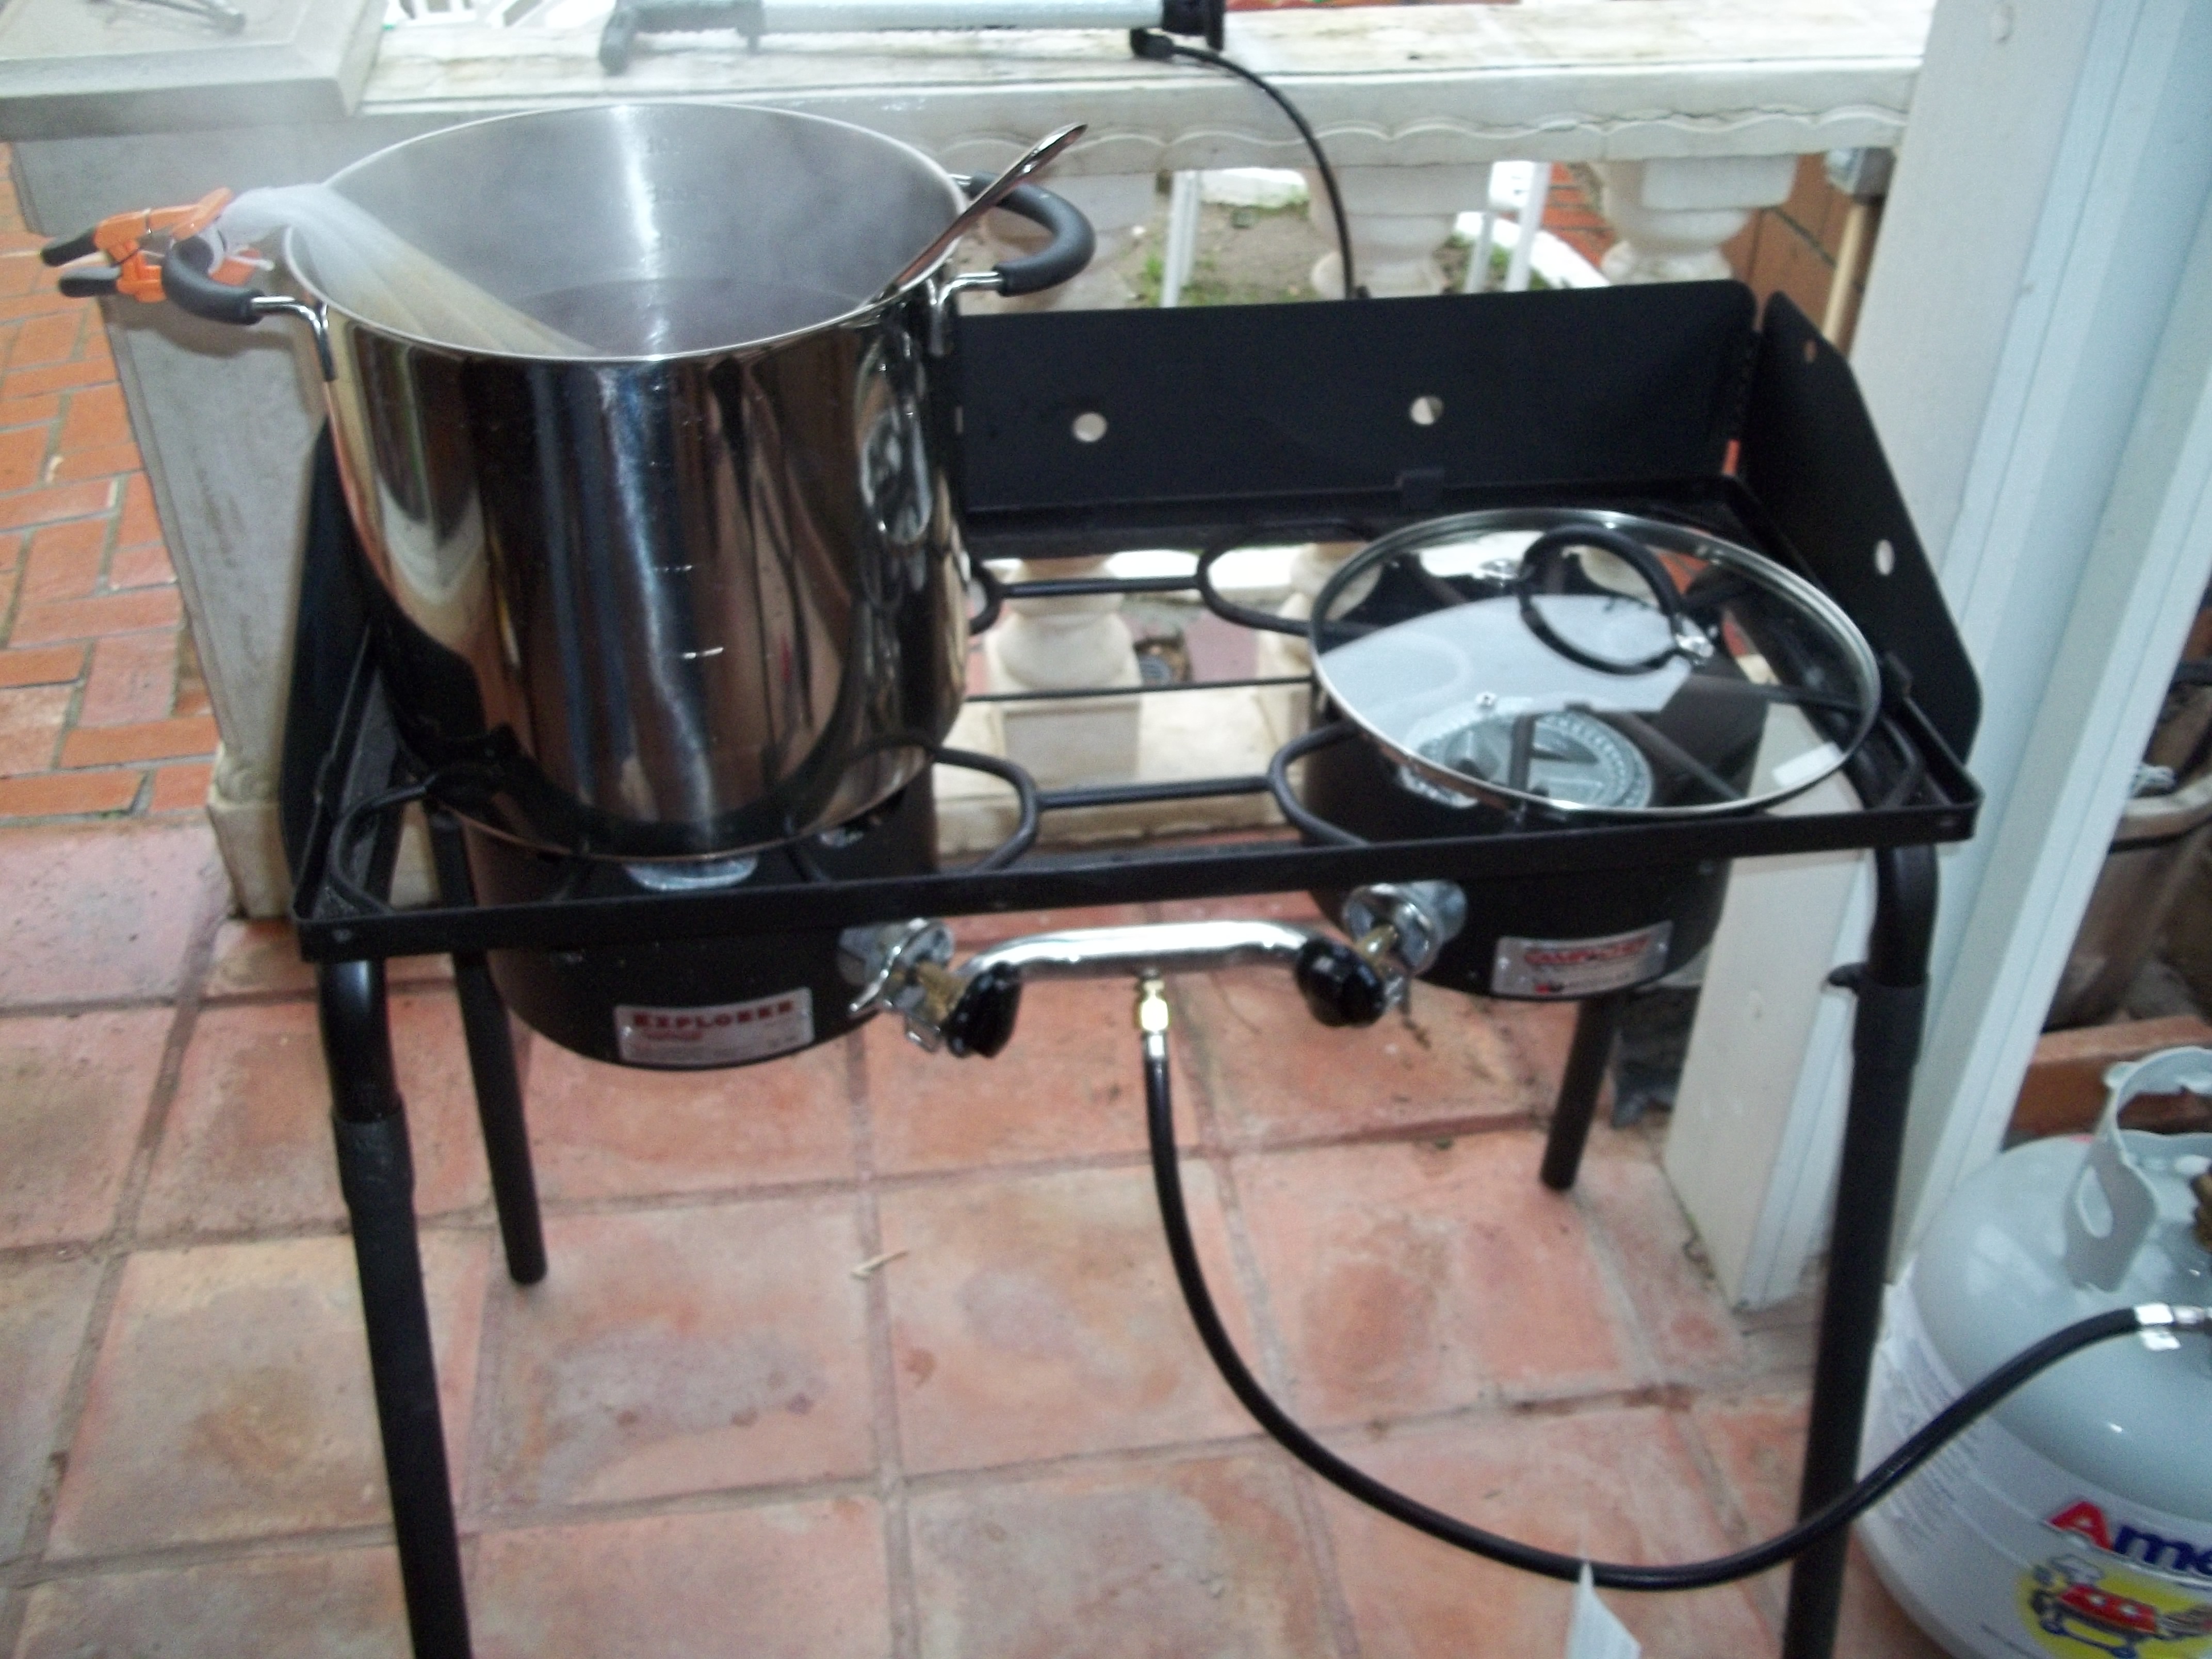 Camp Chef stove  His and Hers Homesteading